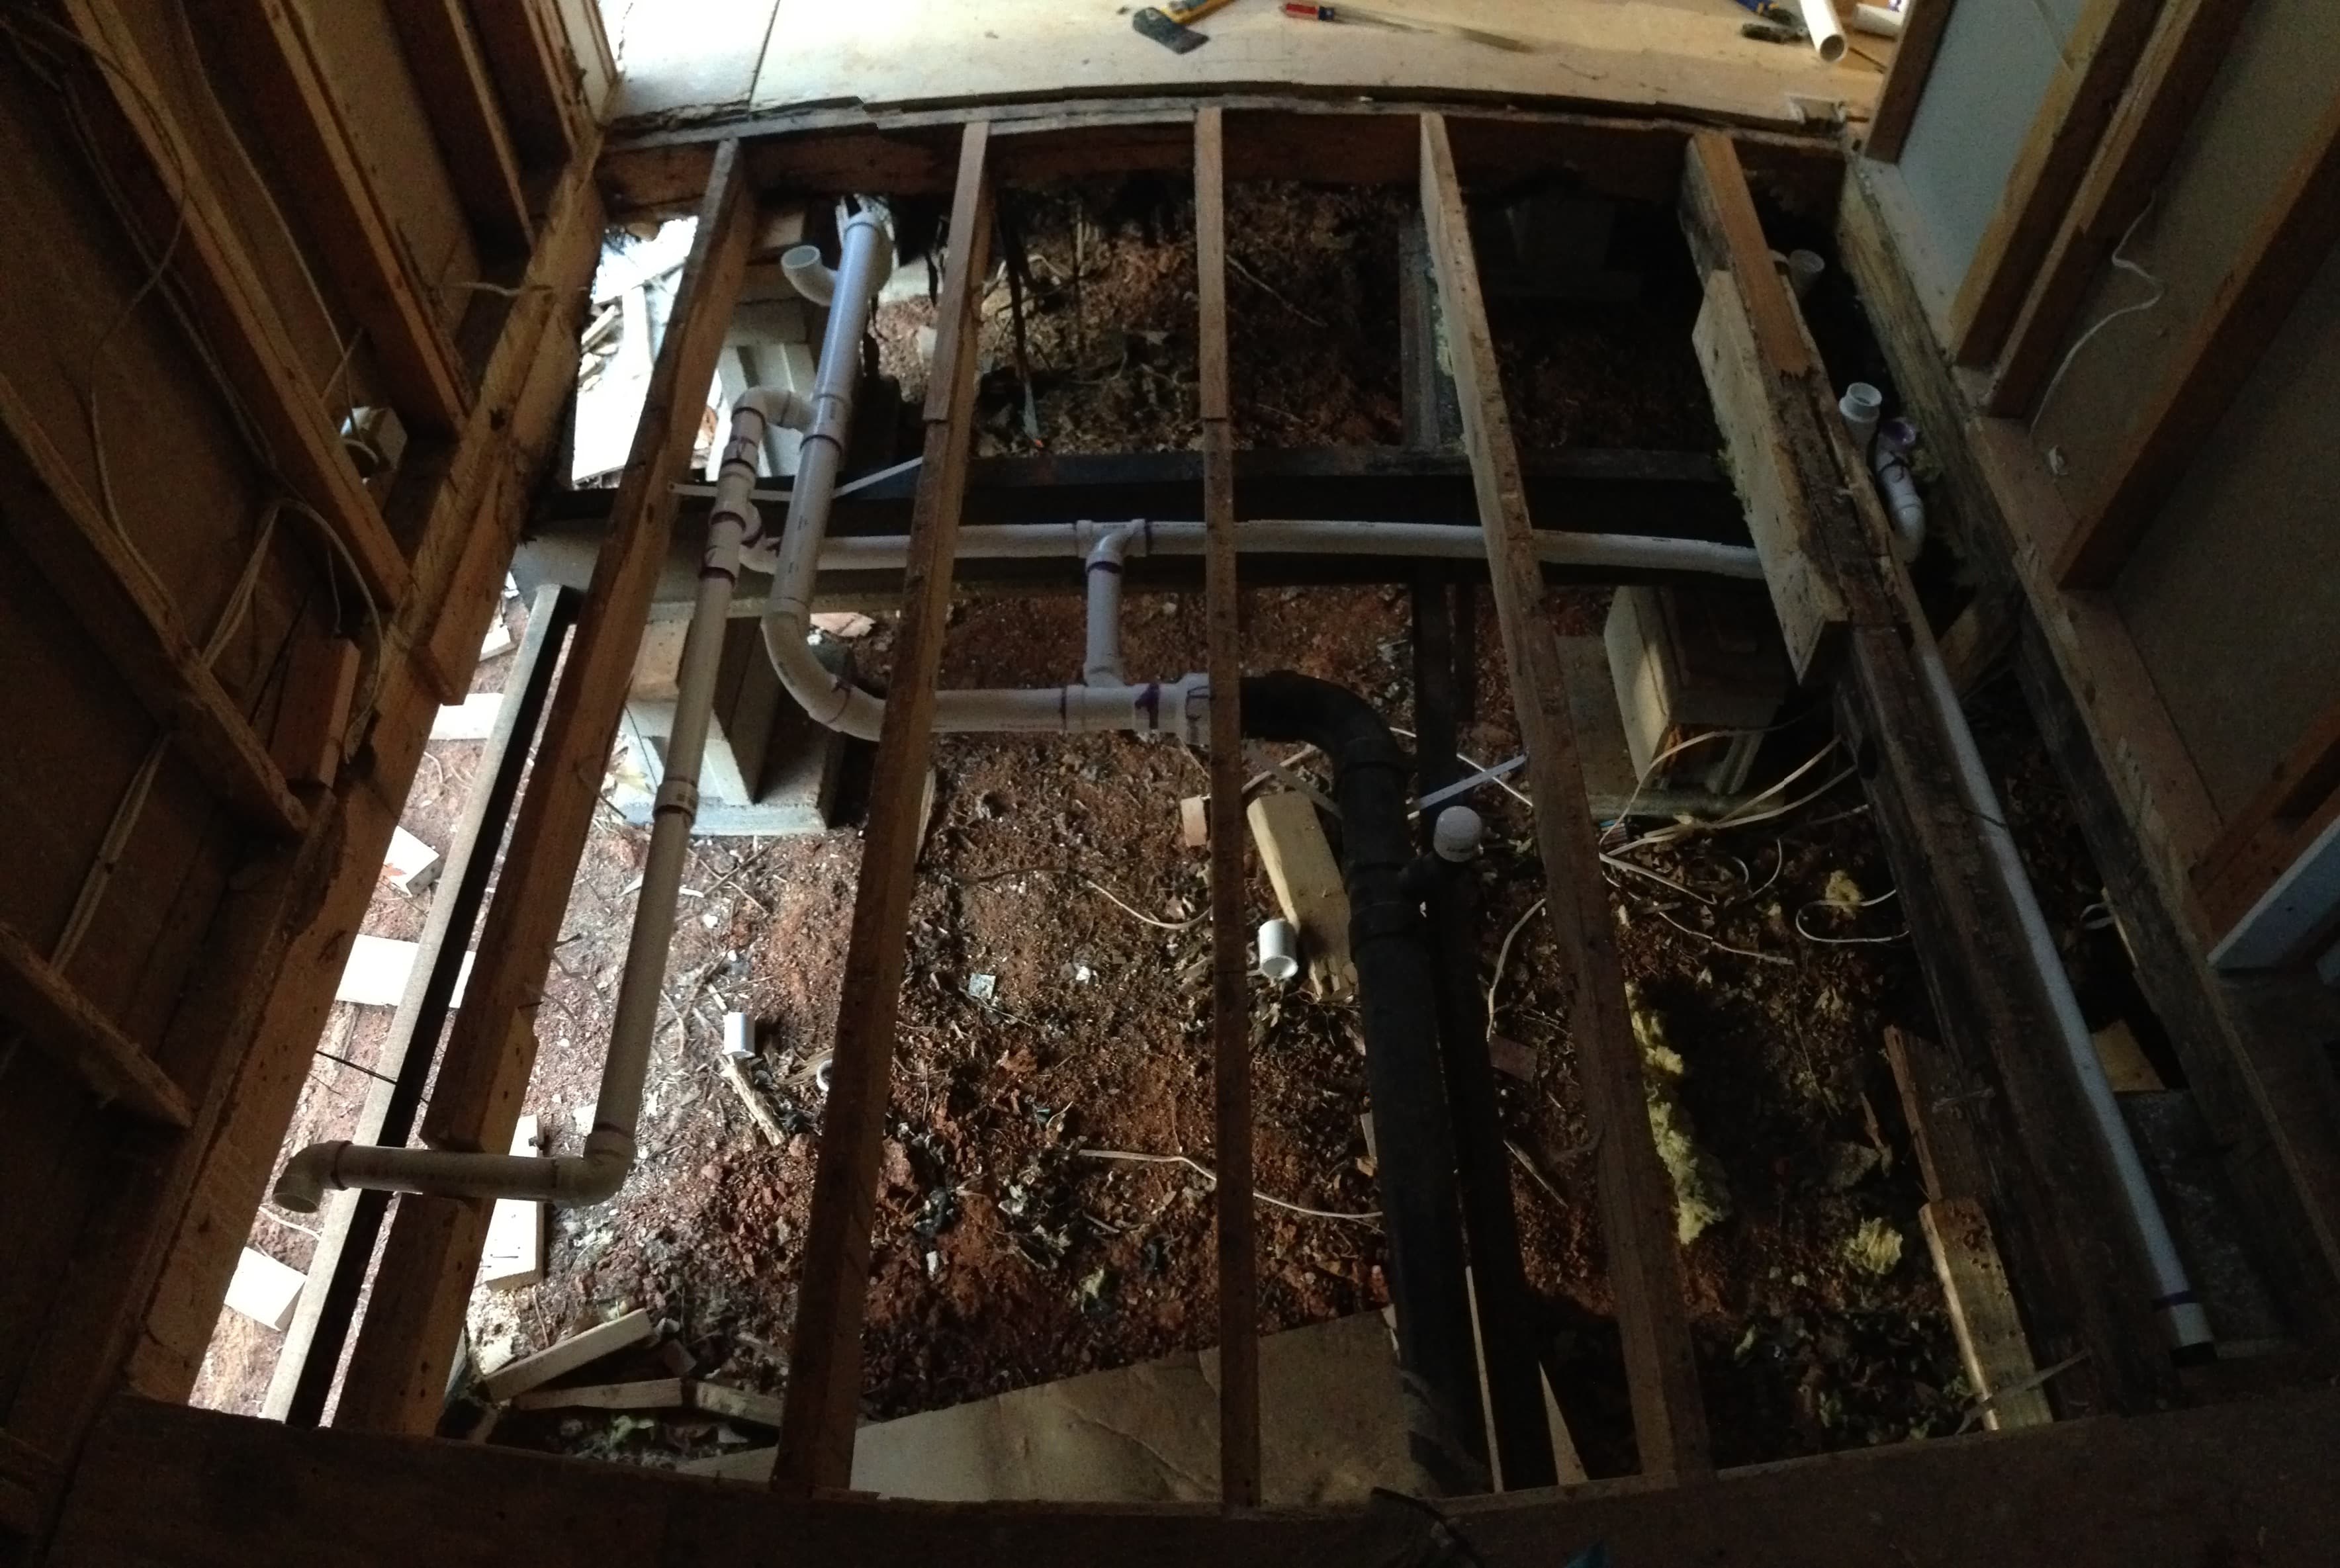 Looking into a large hole. All the subfloor has been removed from this room.